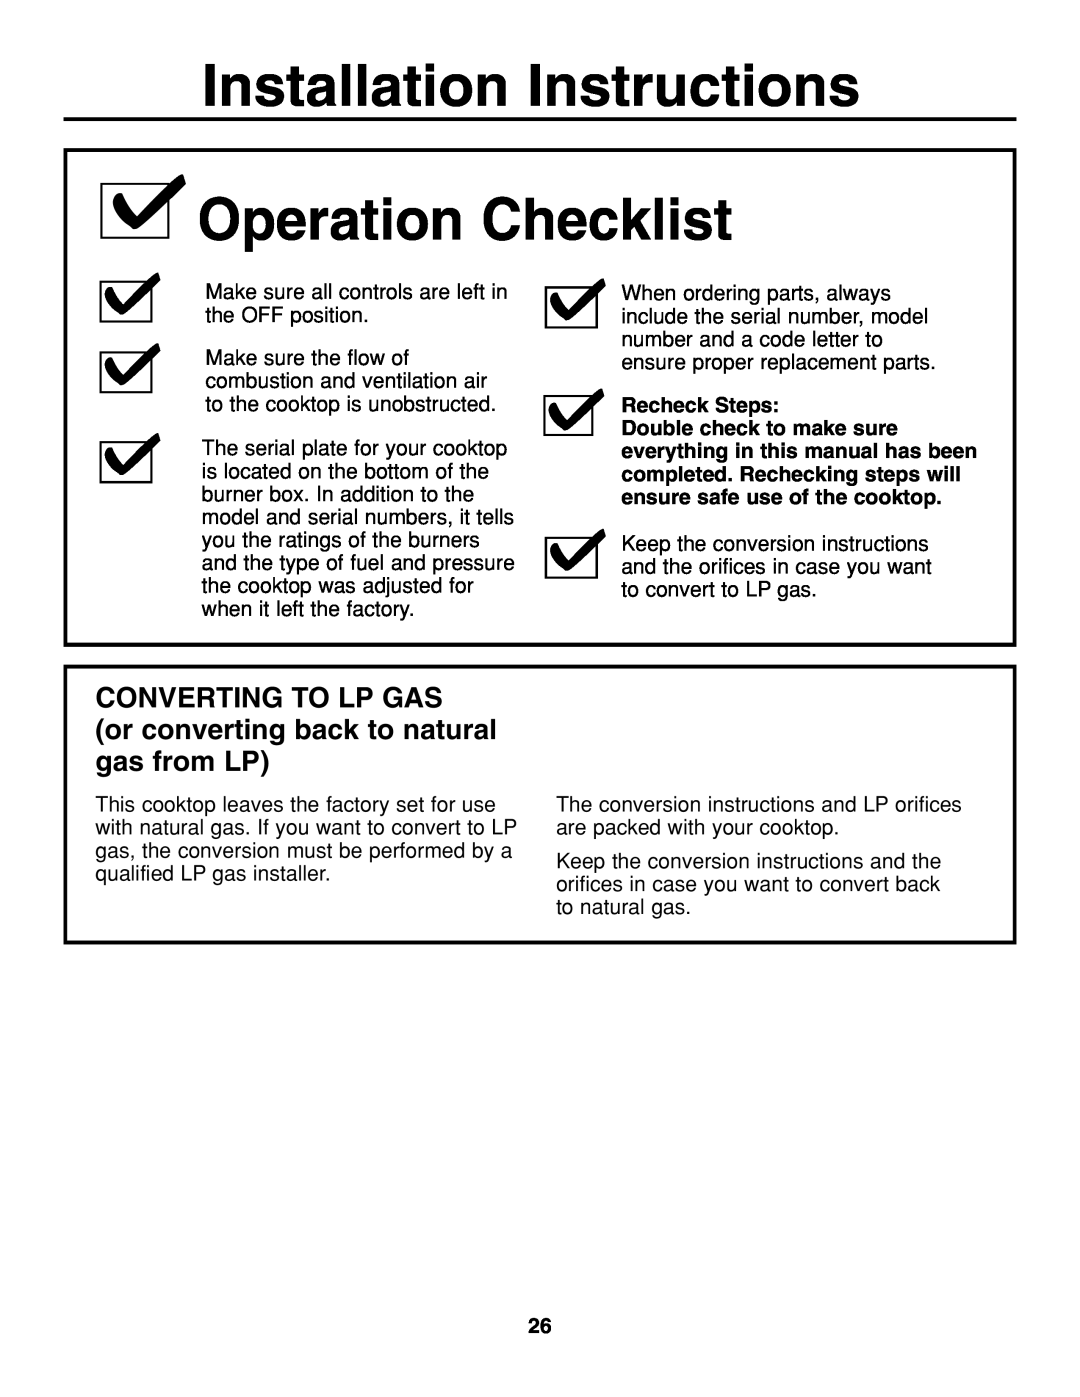 GE JGP637 Installation Instructions Operation Checklist, CONVERTING TO LP GAS or converting back to natural gas from LP 